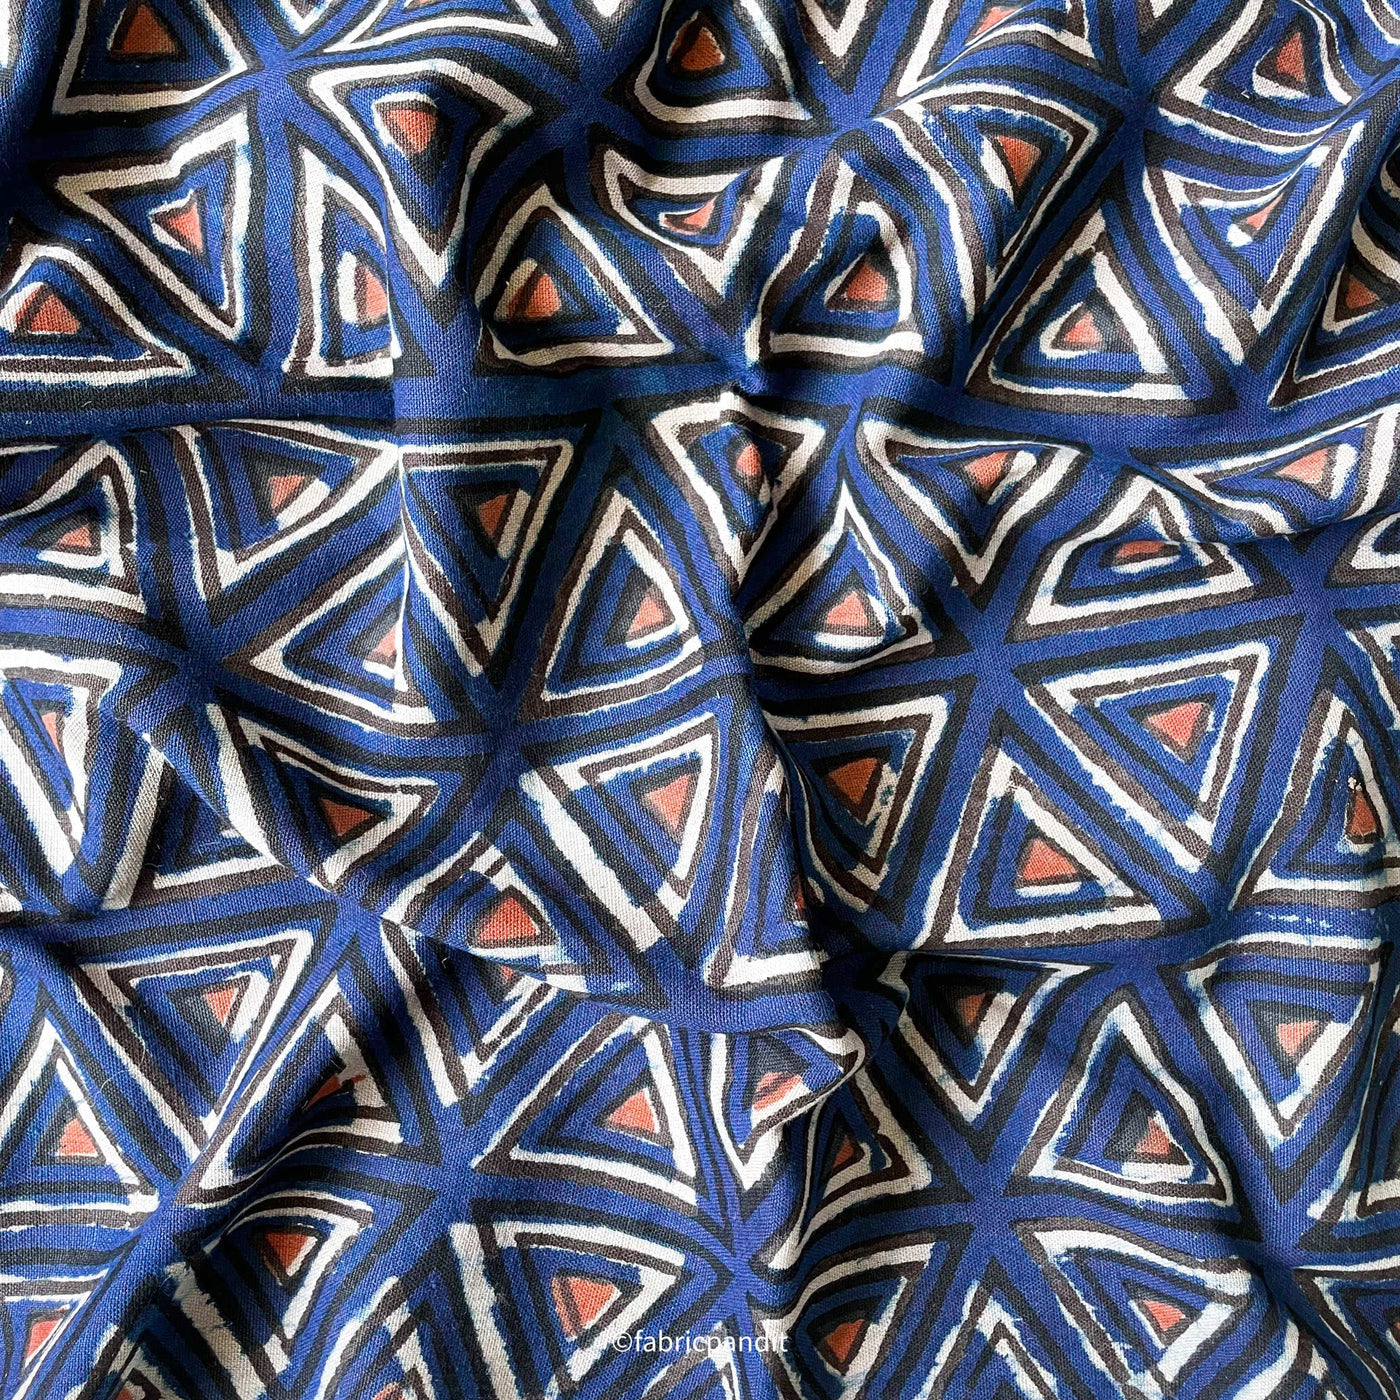 Fabric Pandit Fabric Indigo Blue & Red Geometric Triangles Hand Block Printed Pure Cotton Linen Fabric (Width 42 inches)